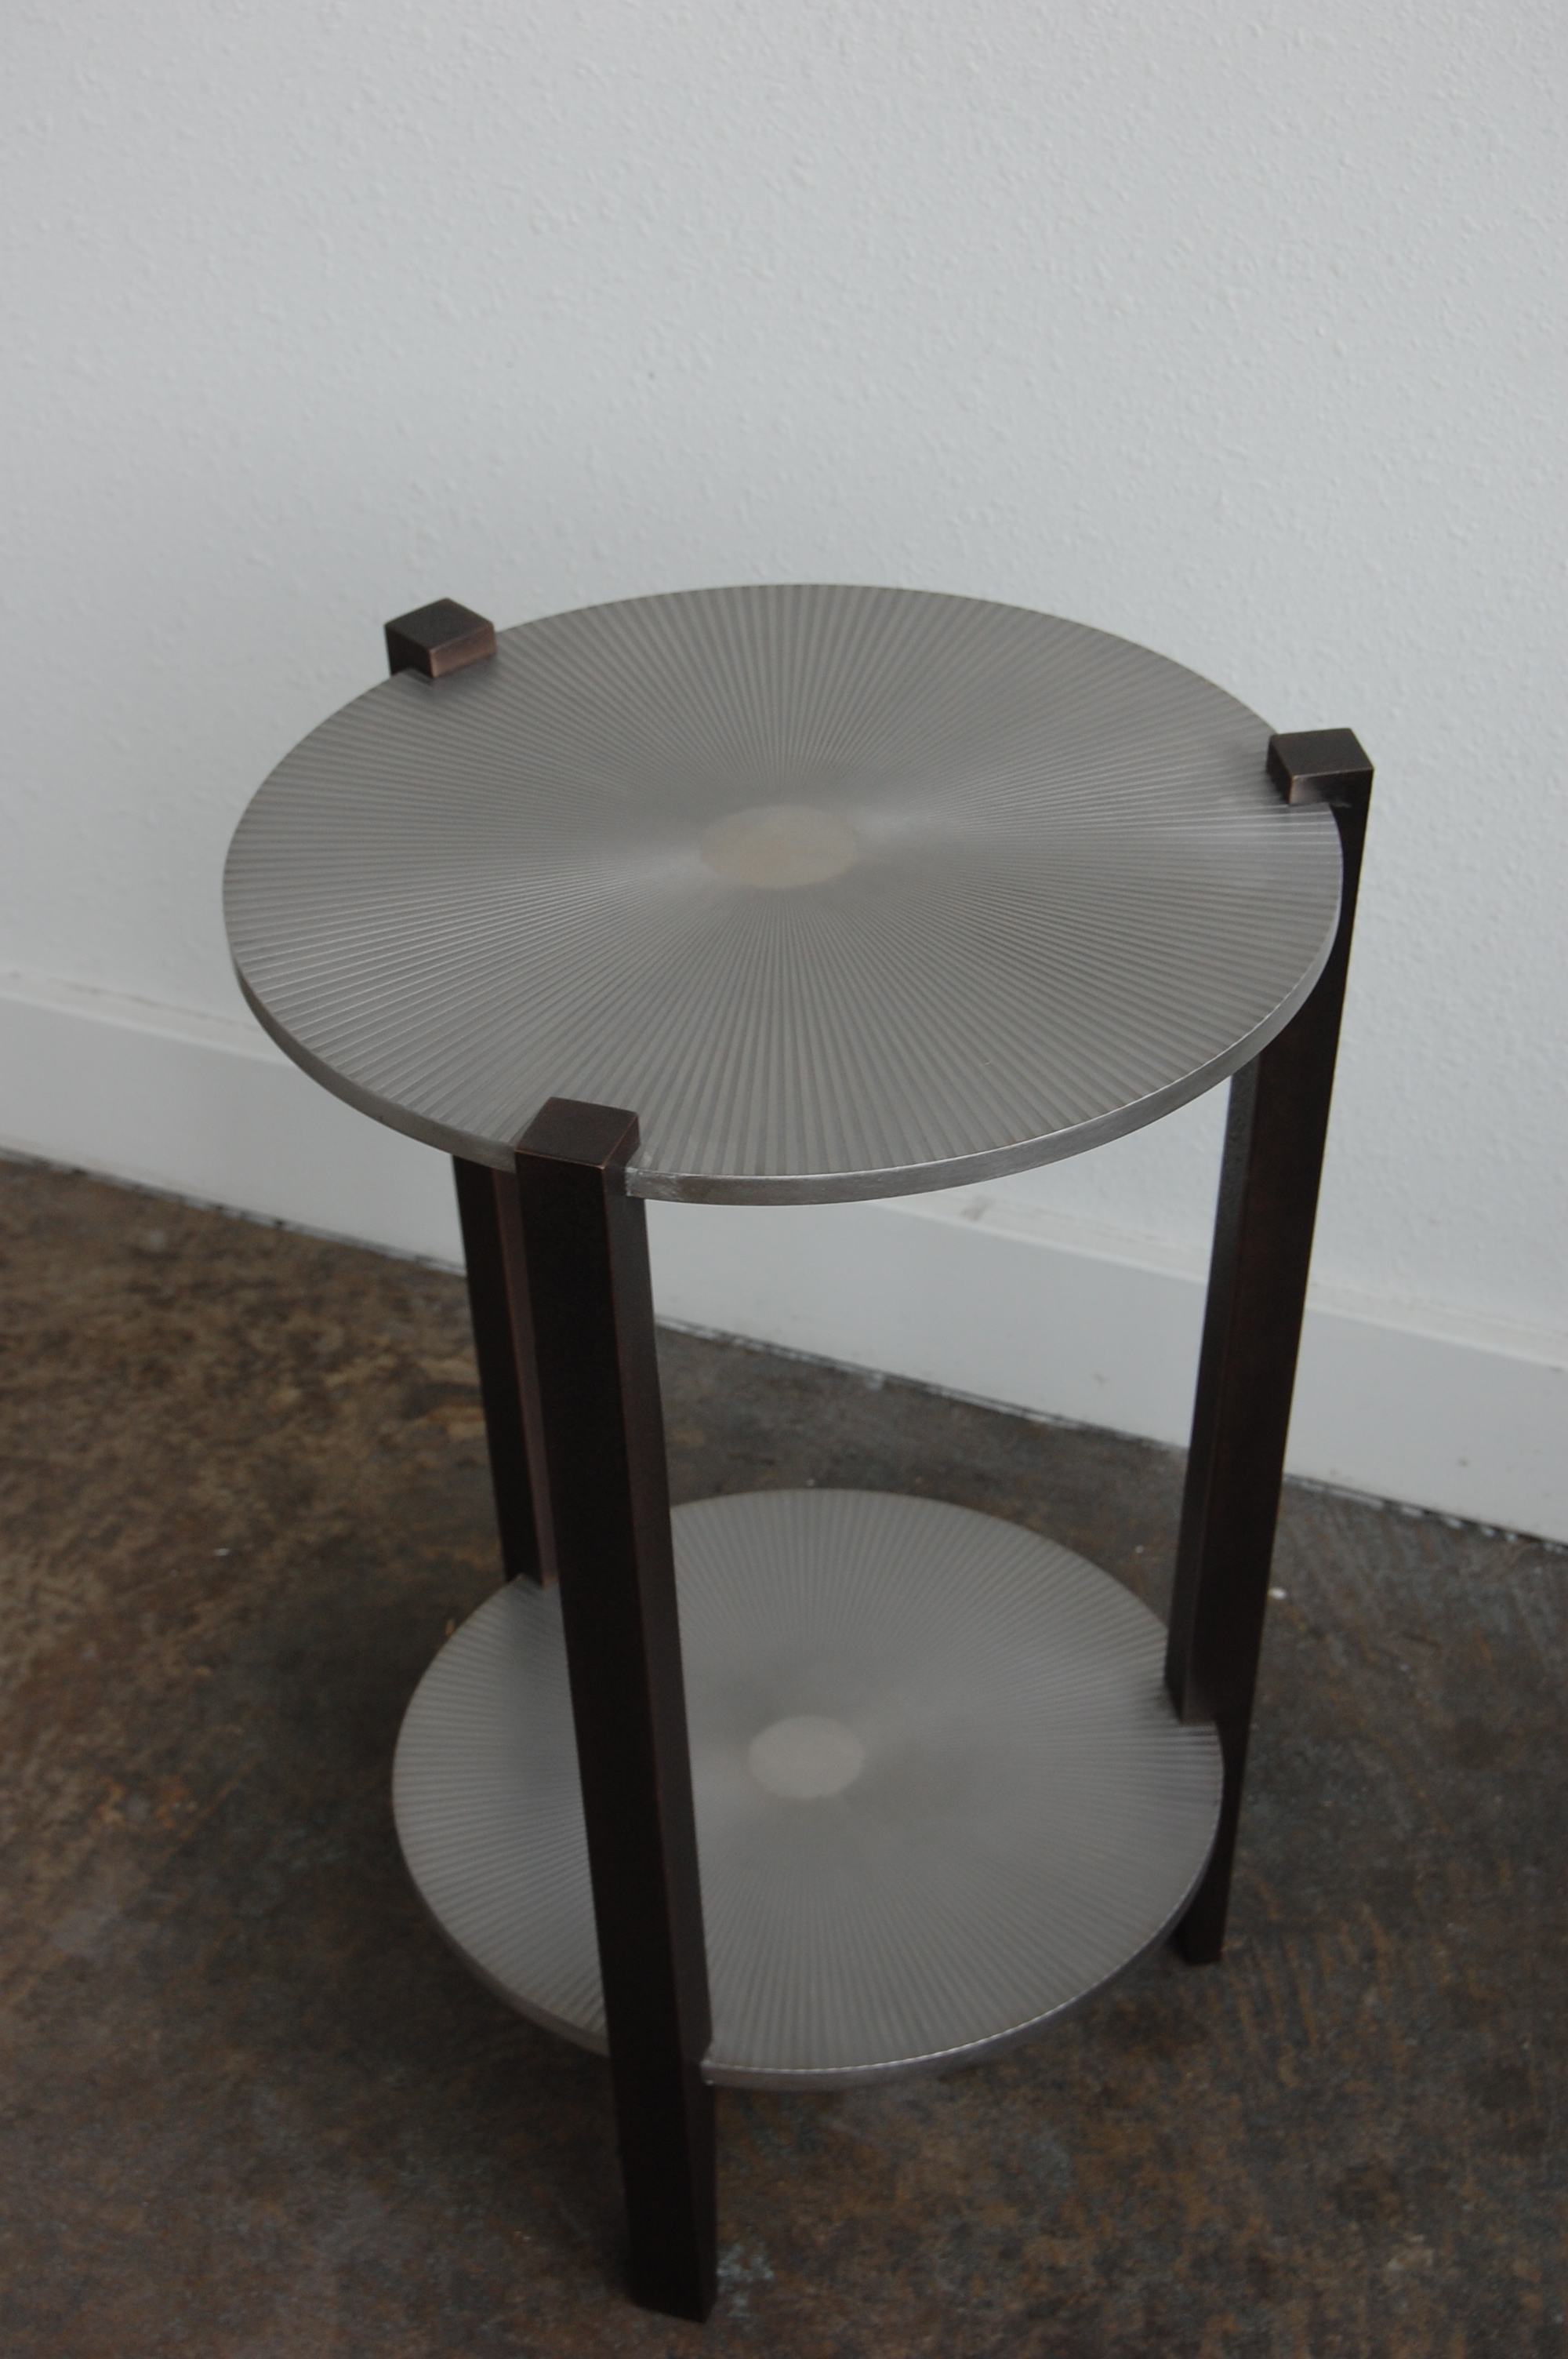  Stainless steel with starburst etched pattern. Legs are textured bronze.  Designed by Formed Objects 